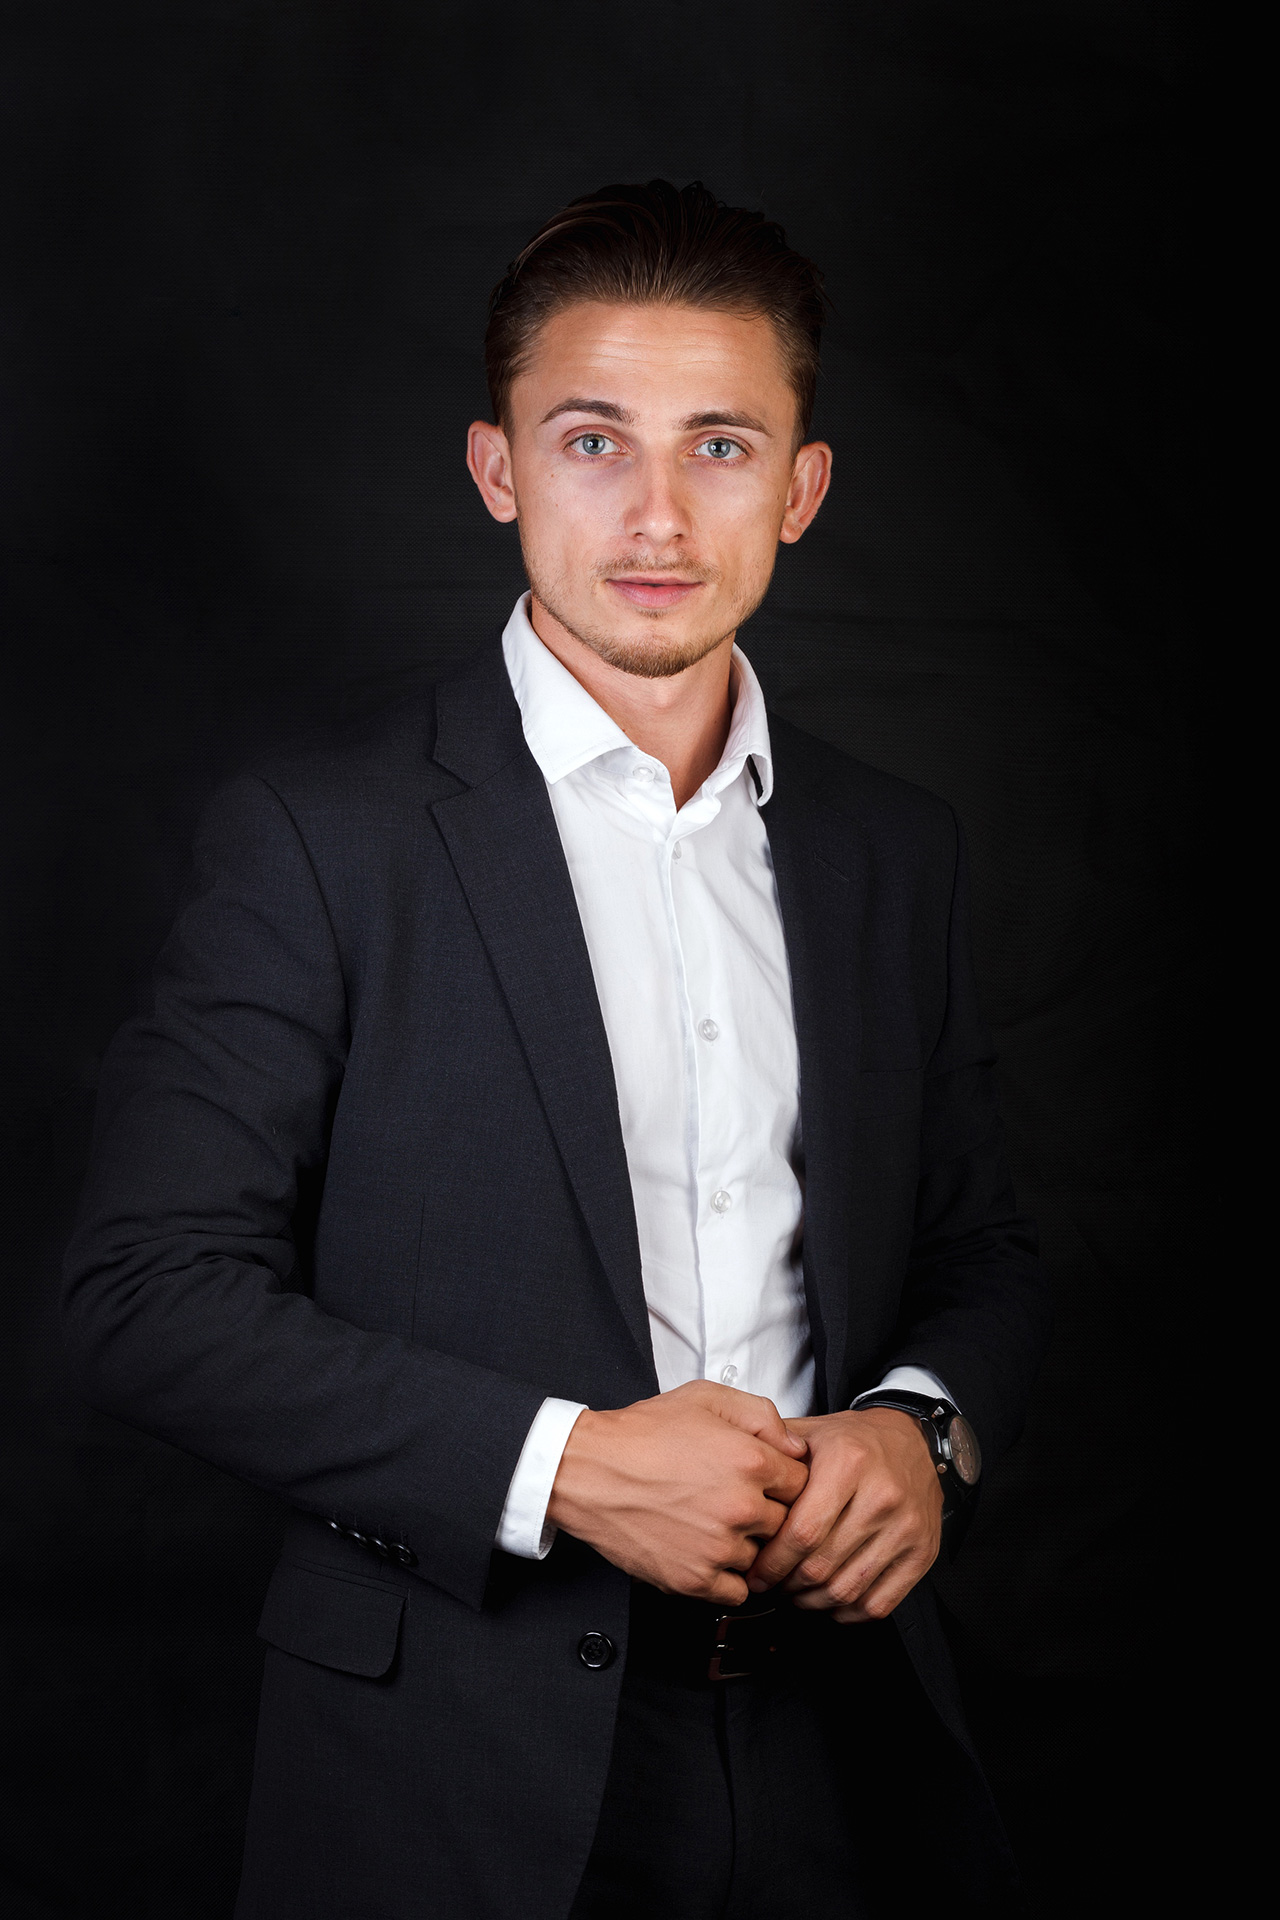 Denys Sokoriev, Content Production & Operation Manager